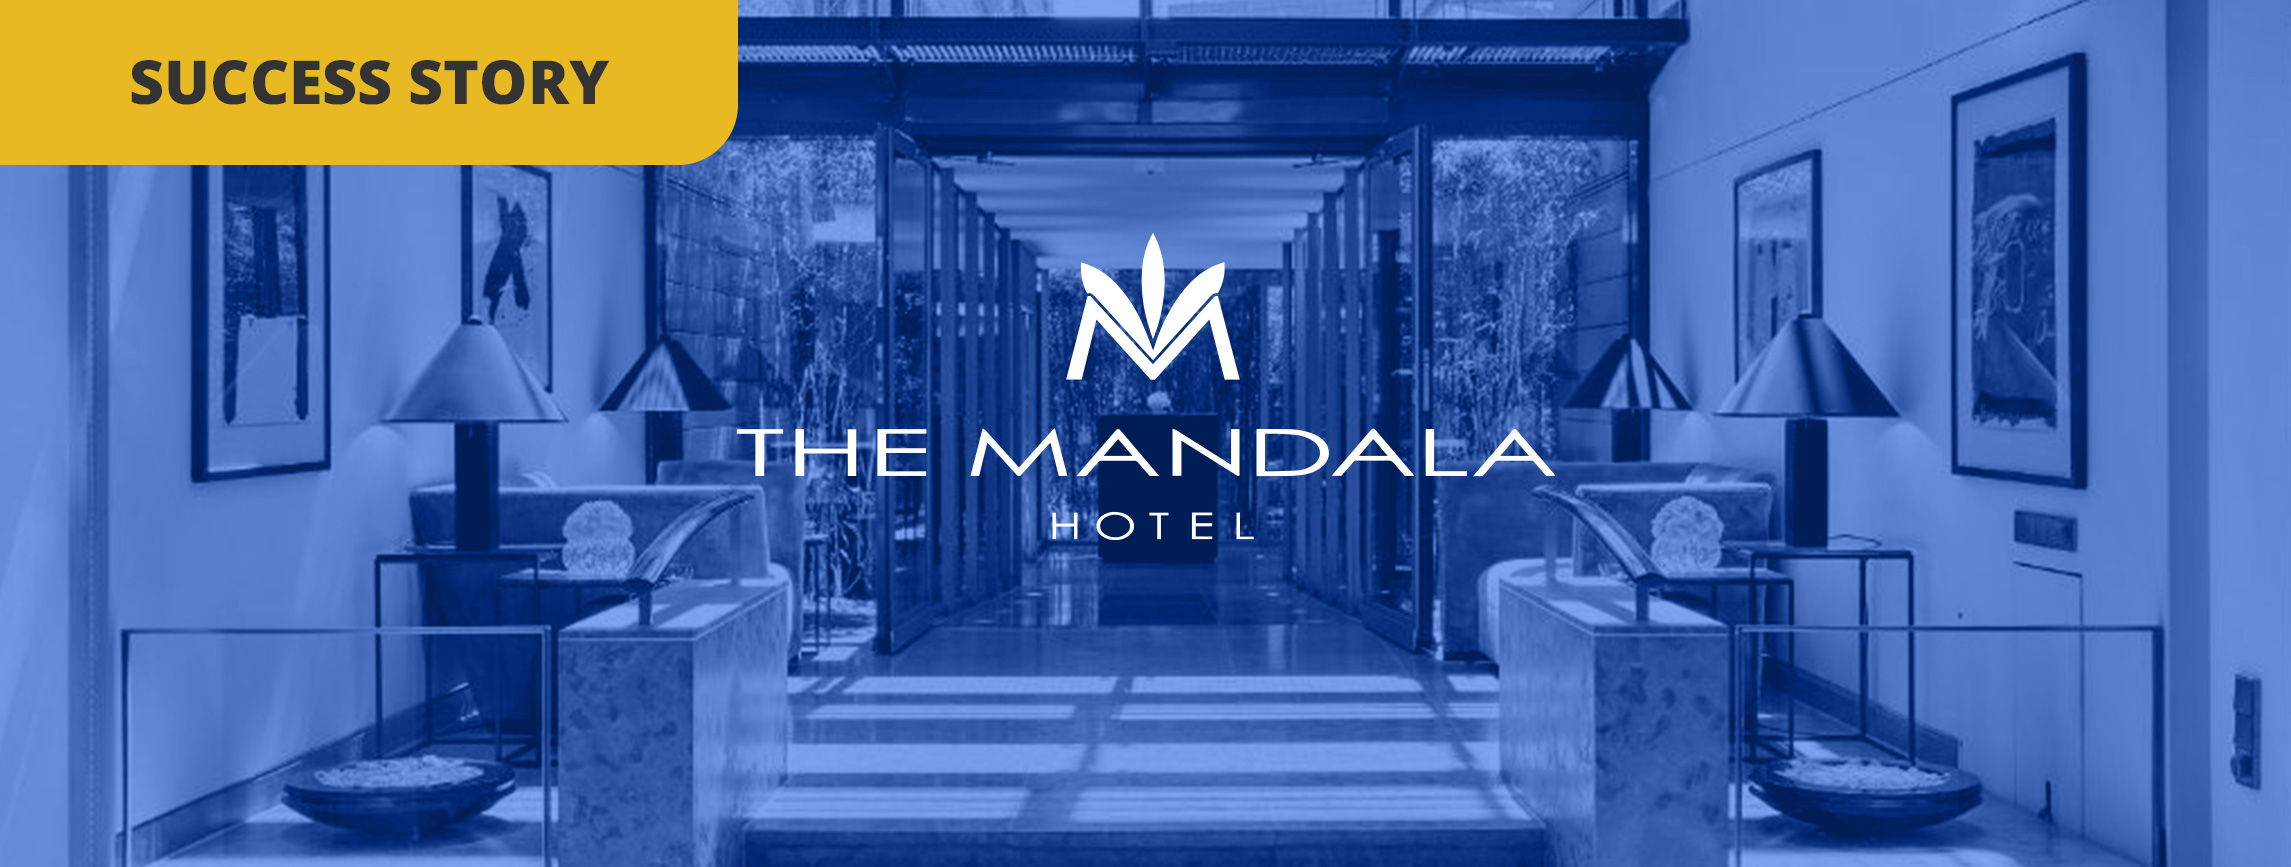 How The Mandala Hotel leverages the in-stay survey to improve guest experiences